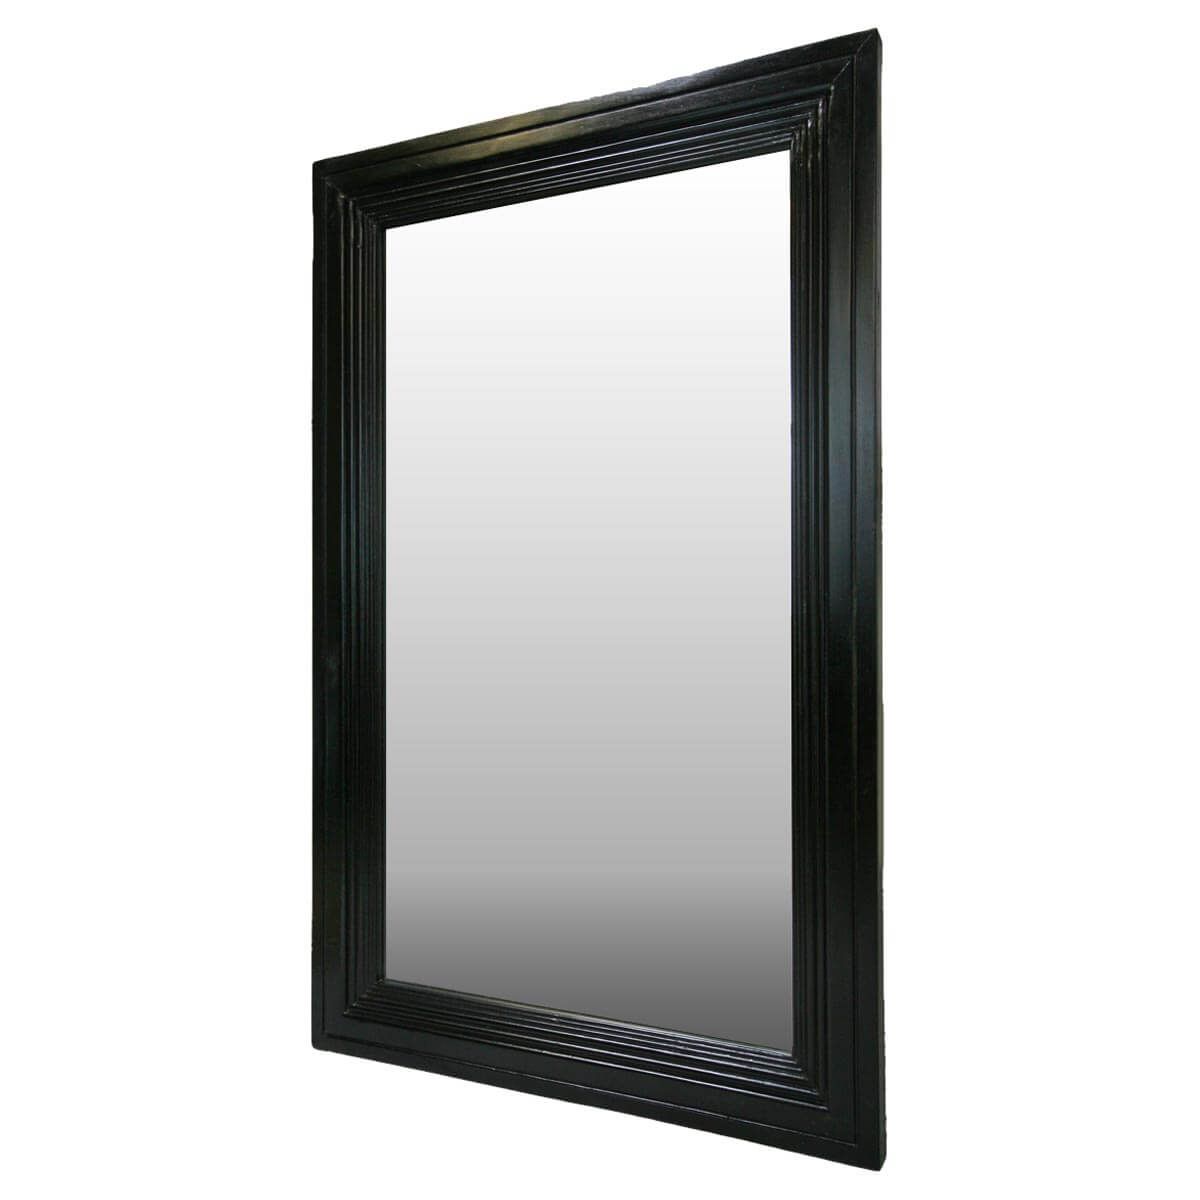 Frontier Rustic Acacia Wood Black Distressed Wall Mirror Frame For Black Wood Wall Mirrors (View 14 of 15)